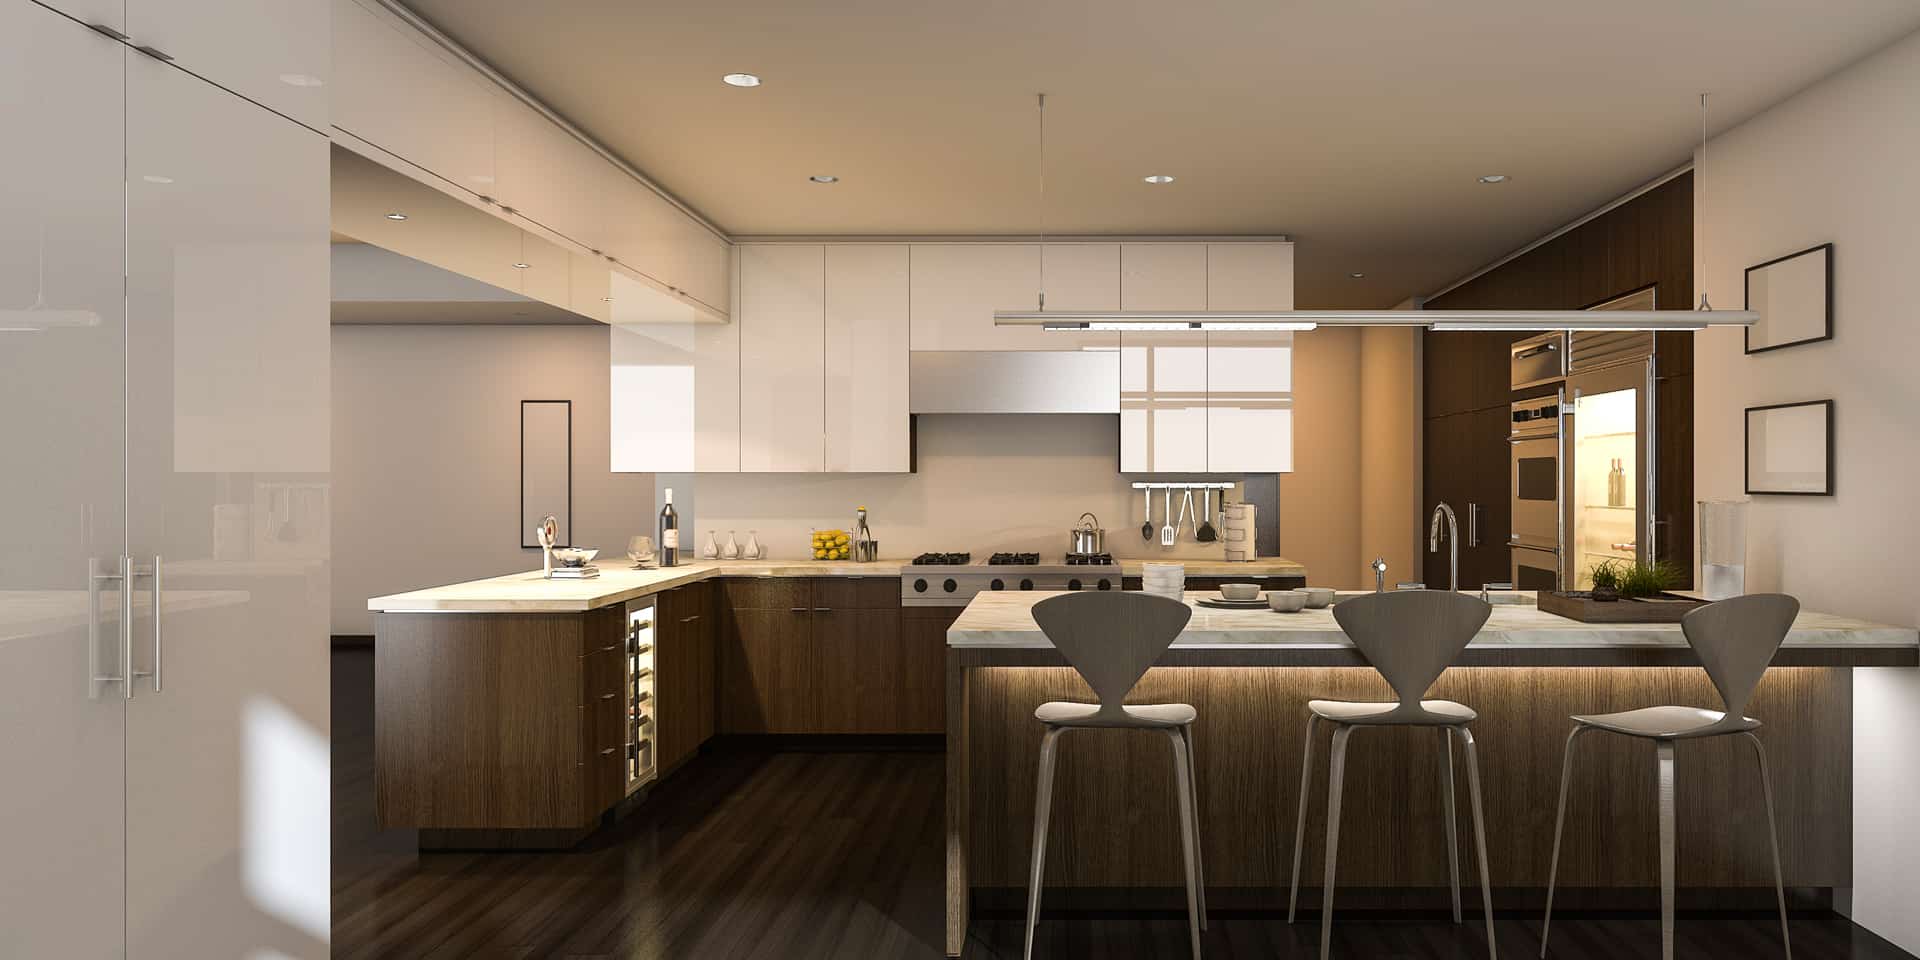 Incorporating minimalist design in your kitchen remodel can transform the heart of your home